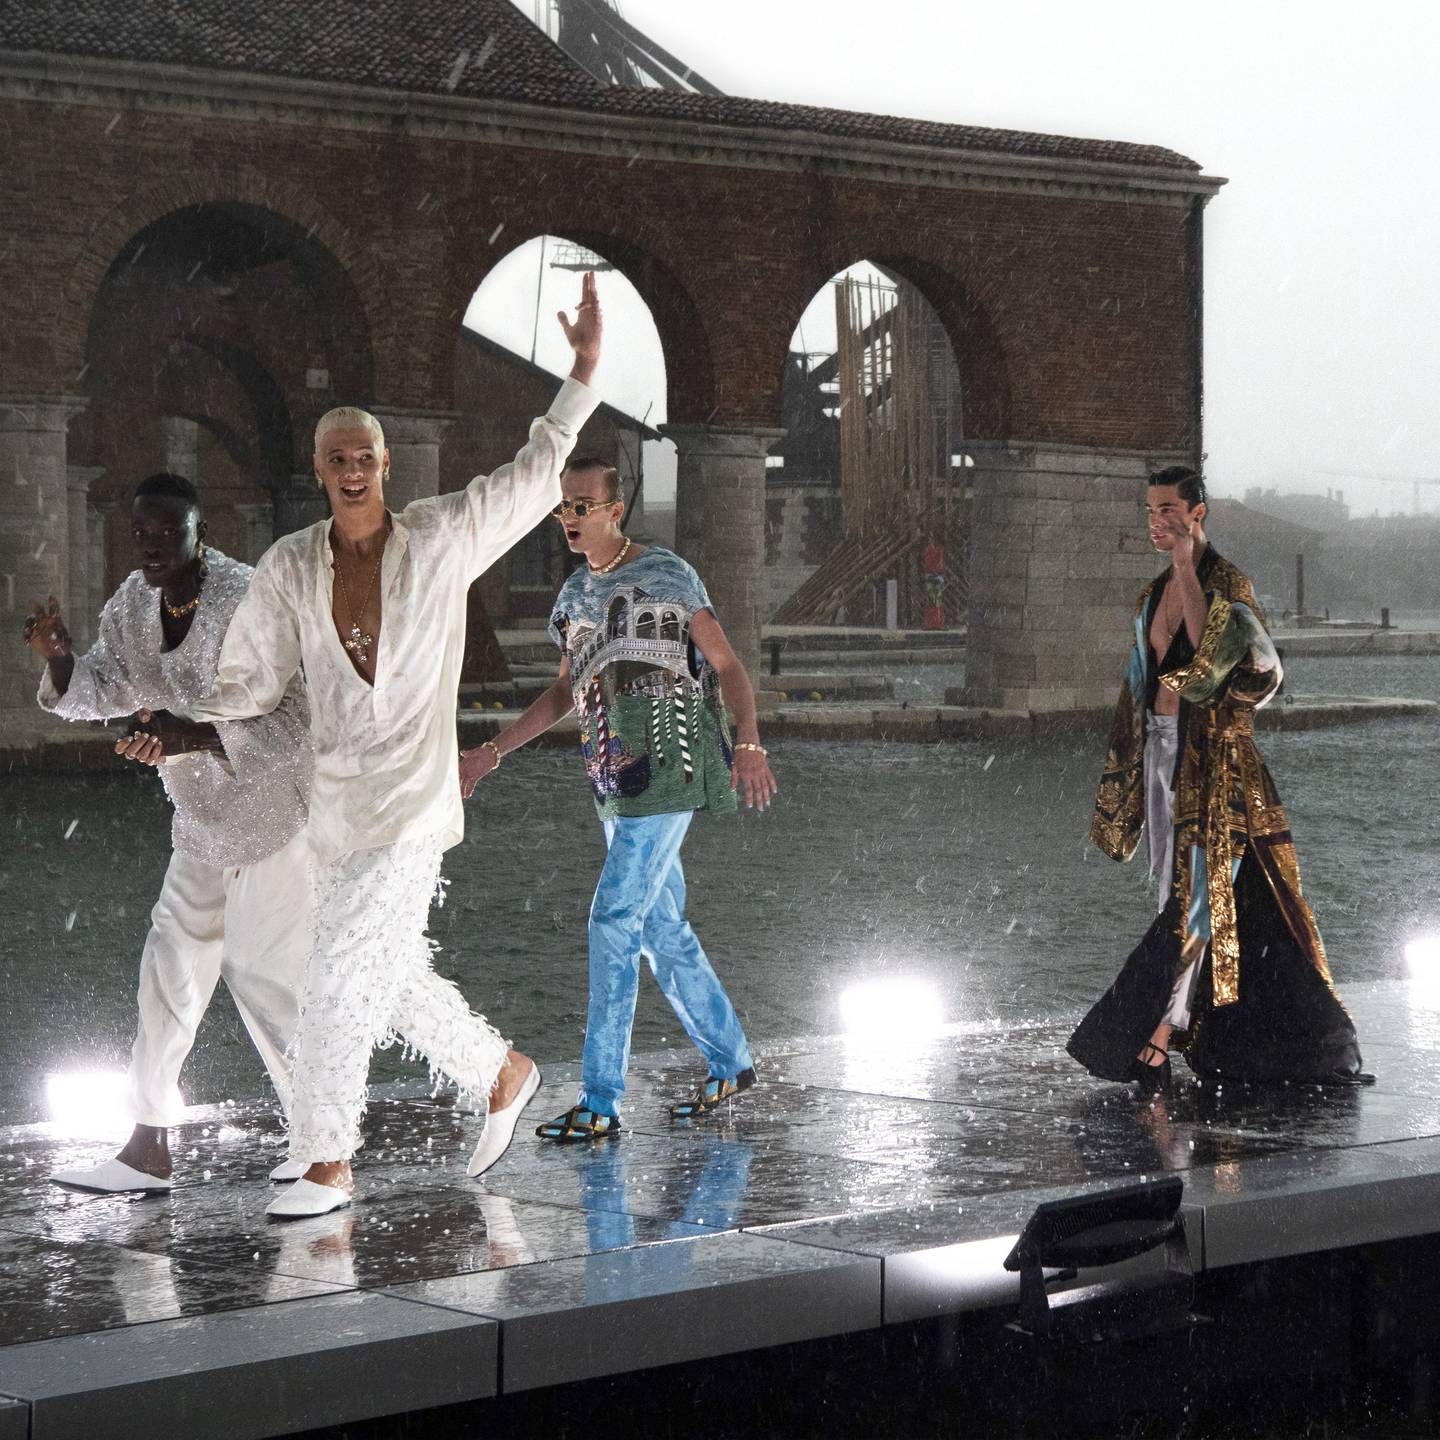 The menswear show concluded with an unexpected downpour. Photo: Dolce & Gabbana